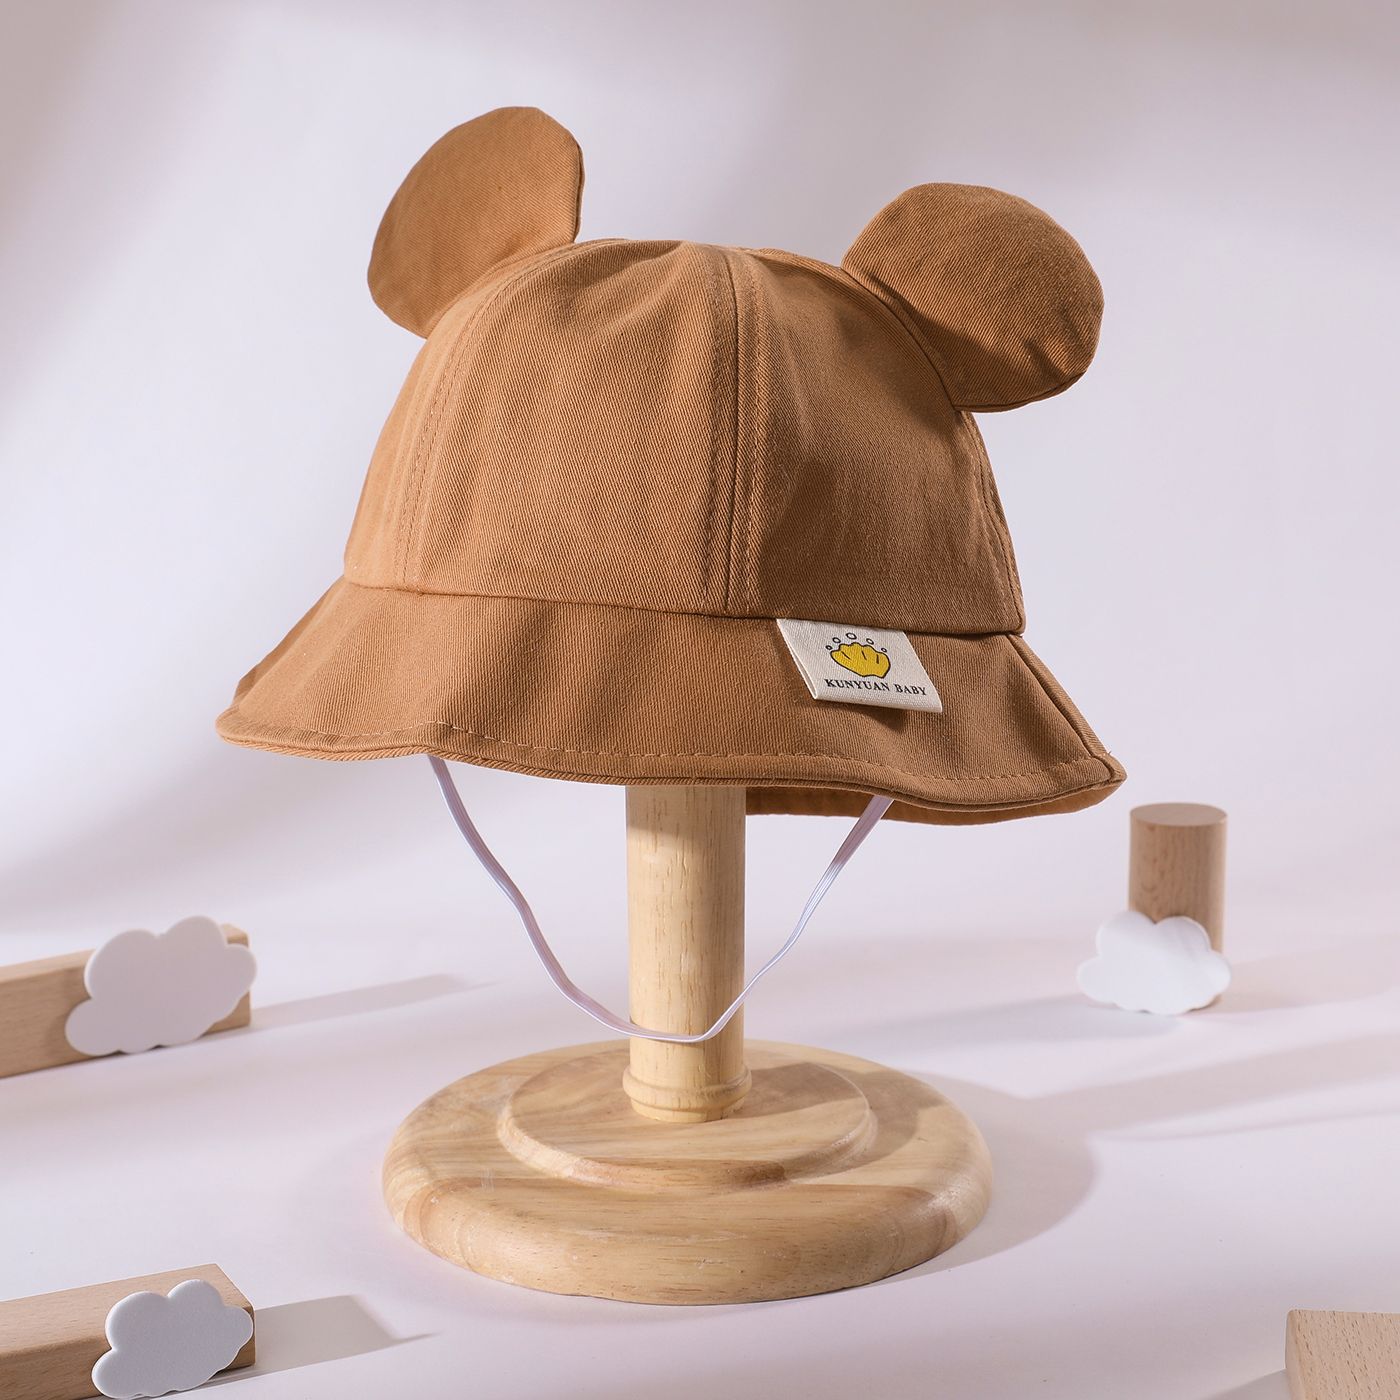 Toddler Plain Dual Ears Bucket Hat product